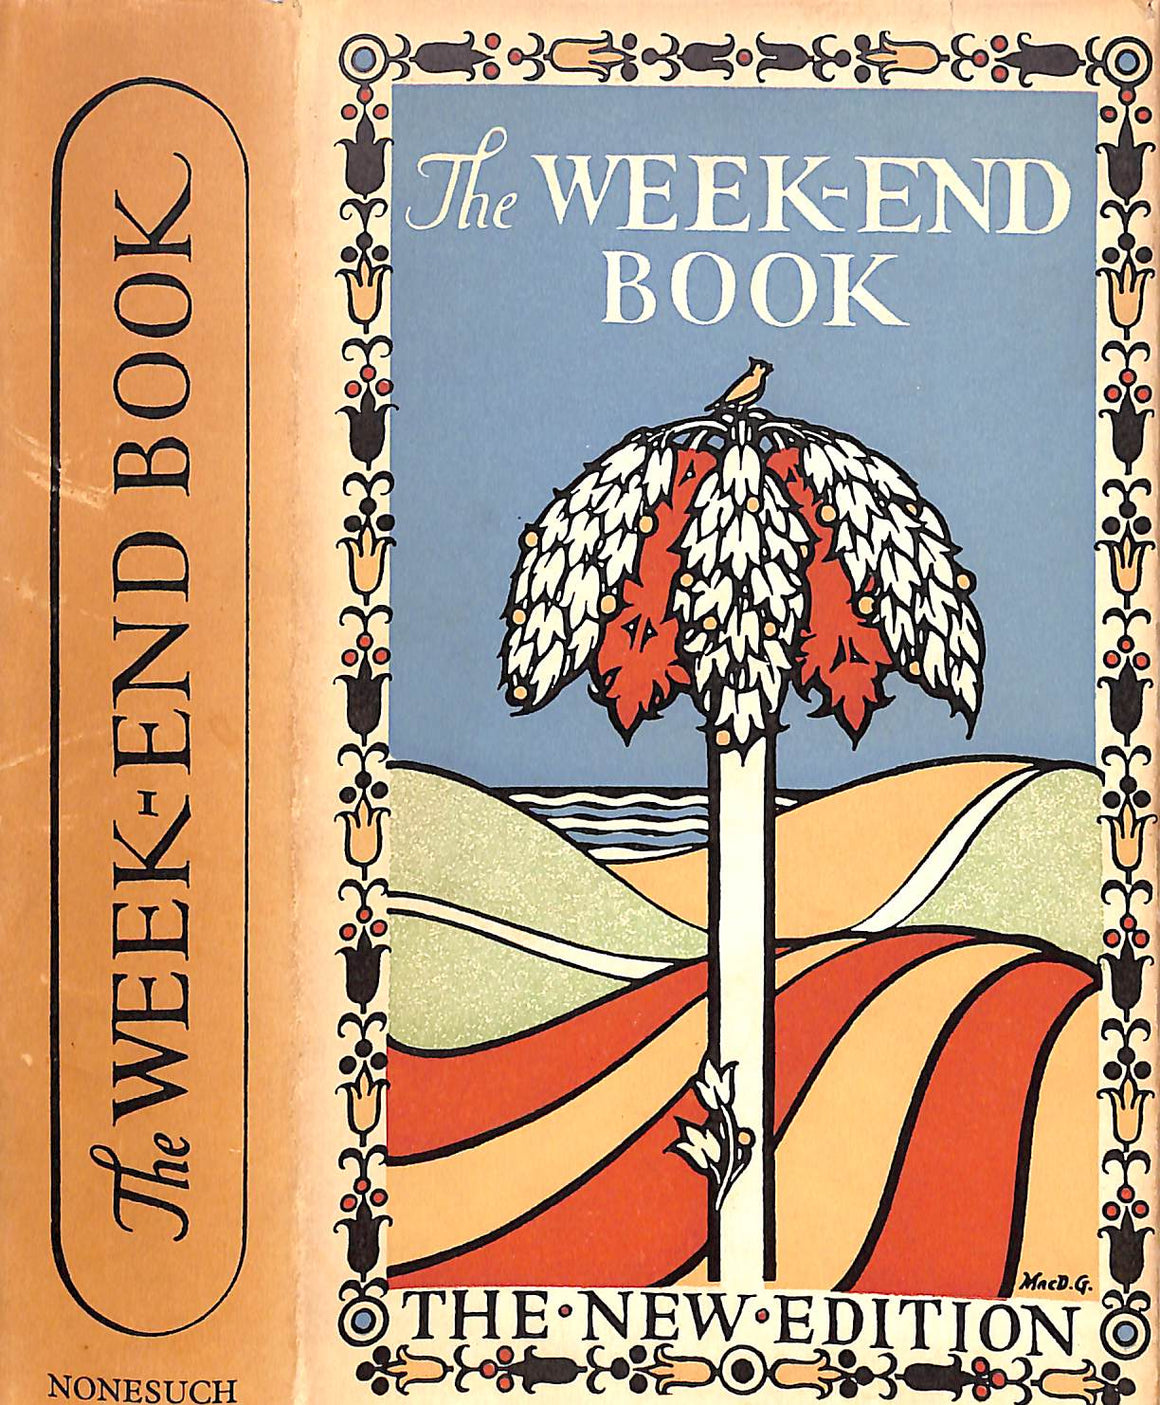 "The Week-End Book" 1955 MEYNELL, Francis [editor]